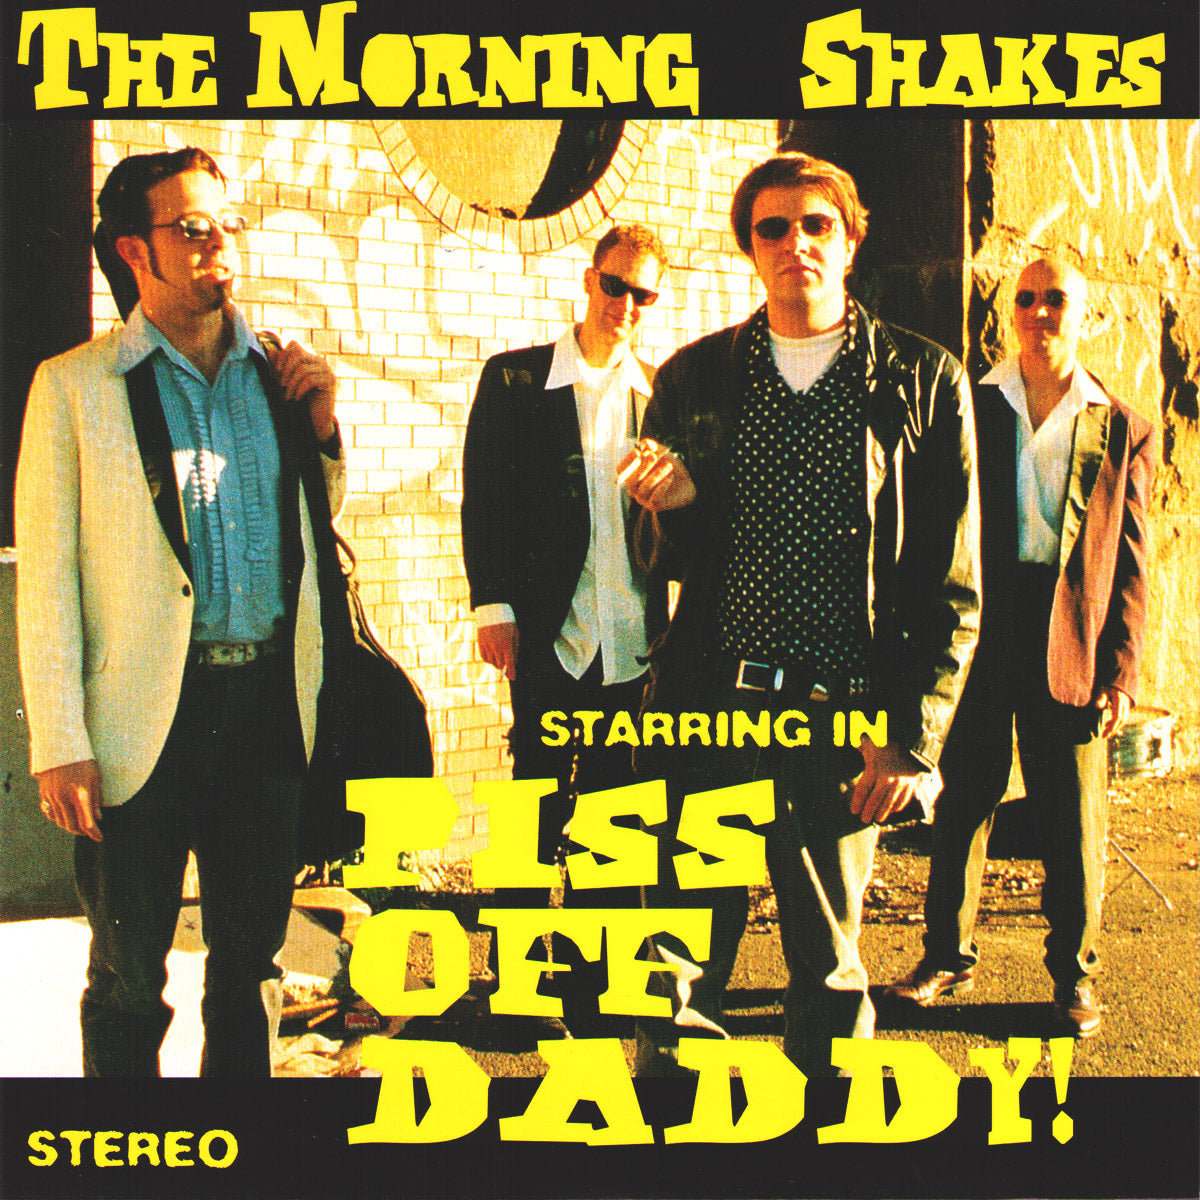 Morning Shakes- Piss Off Daddy 7” ~DEVIL DOGS!